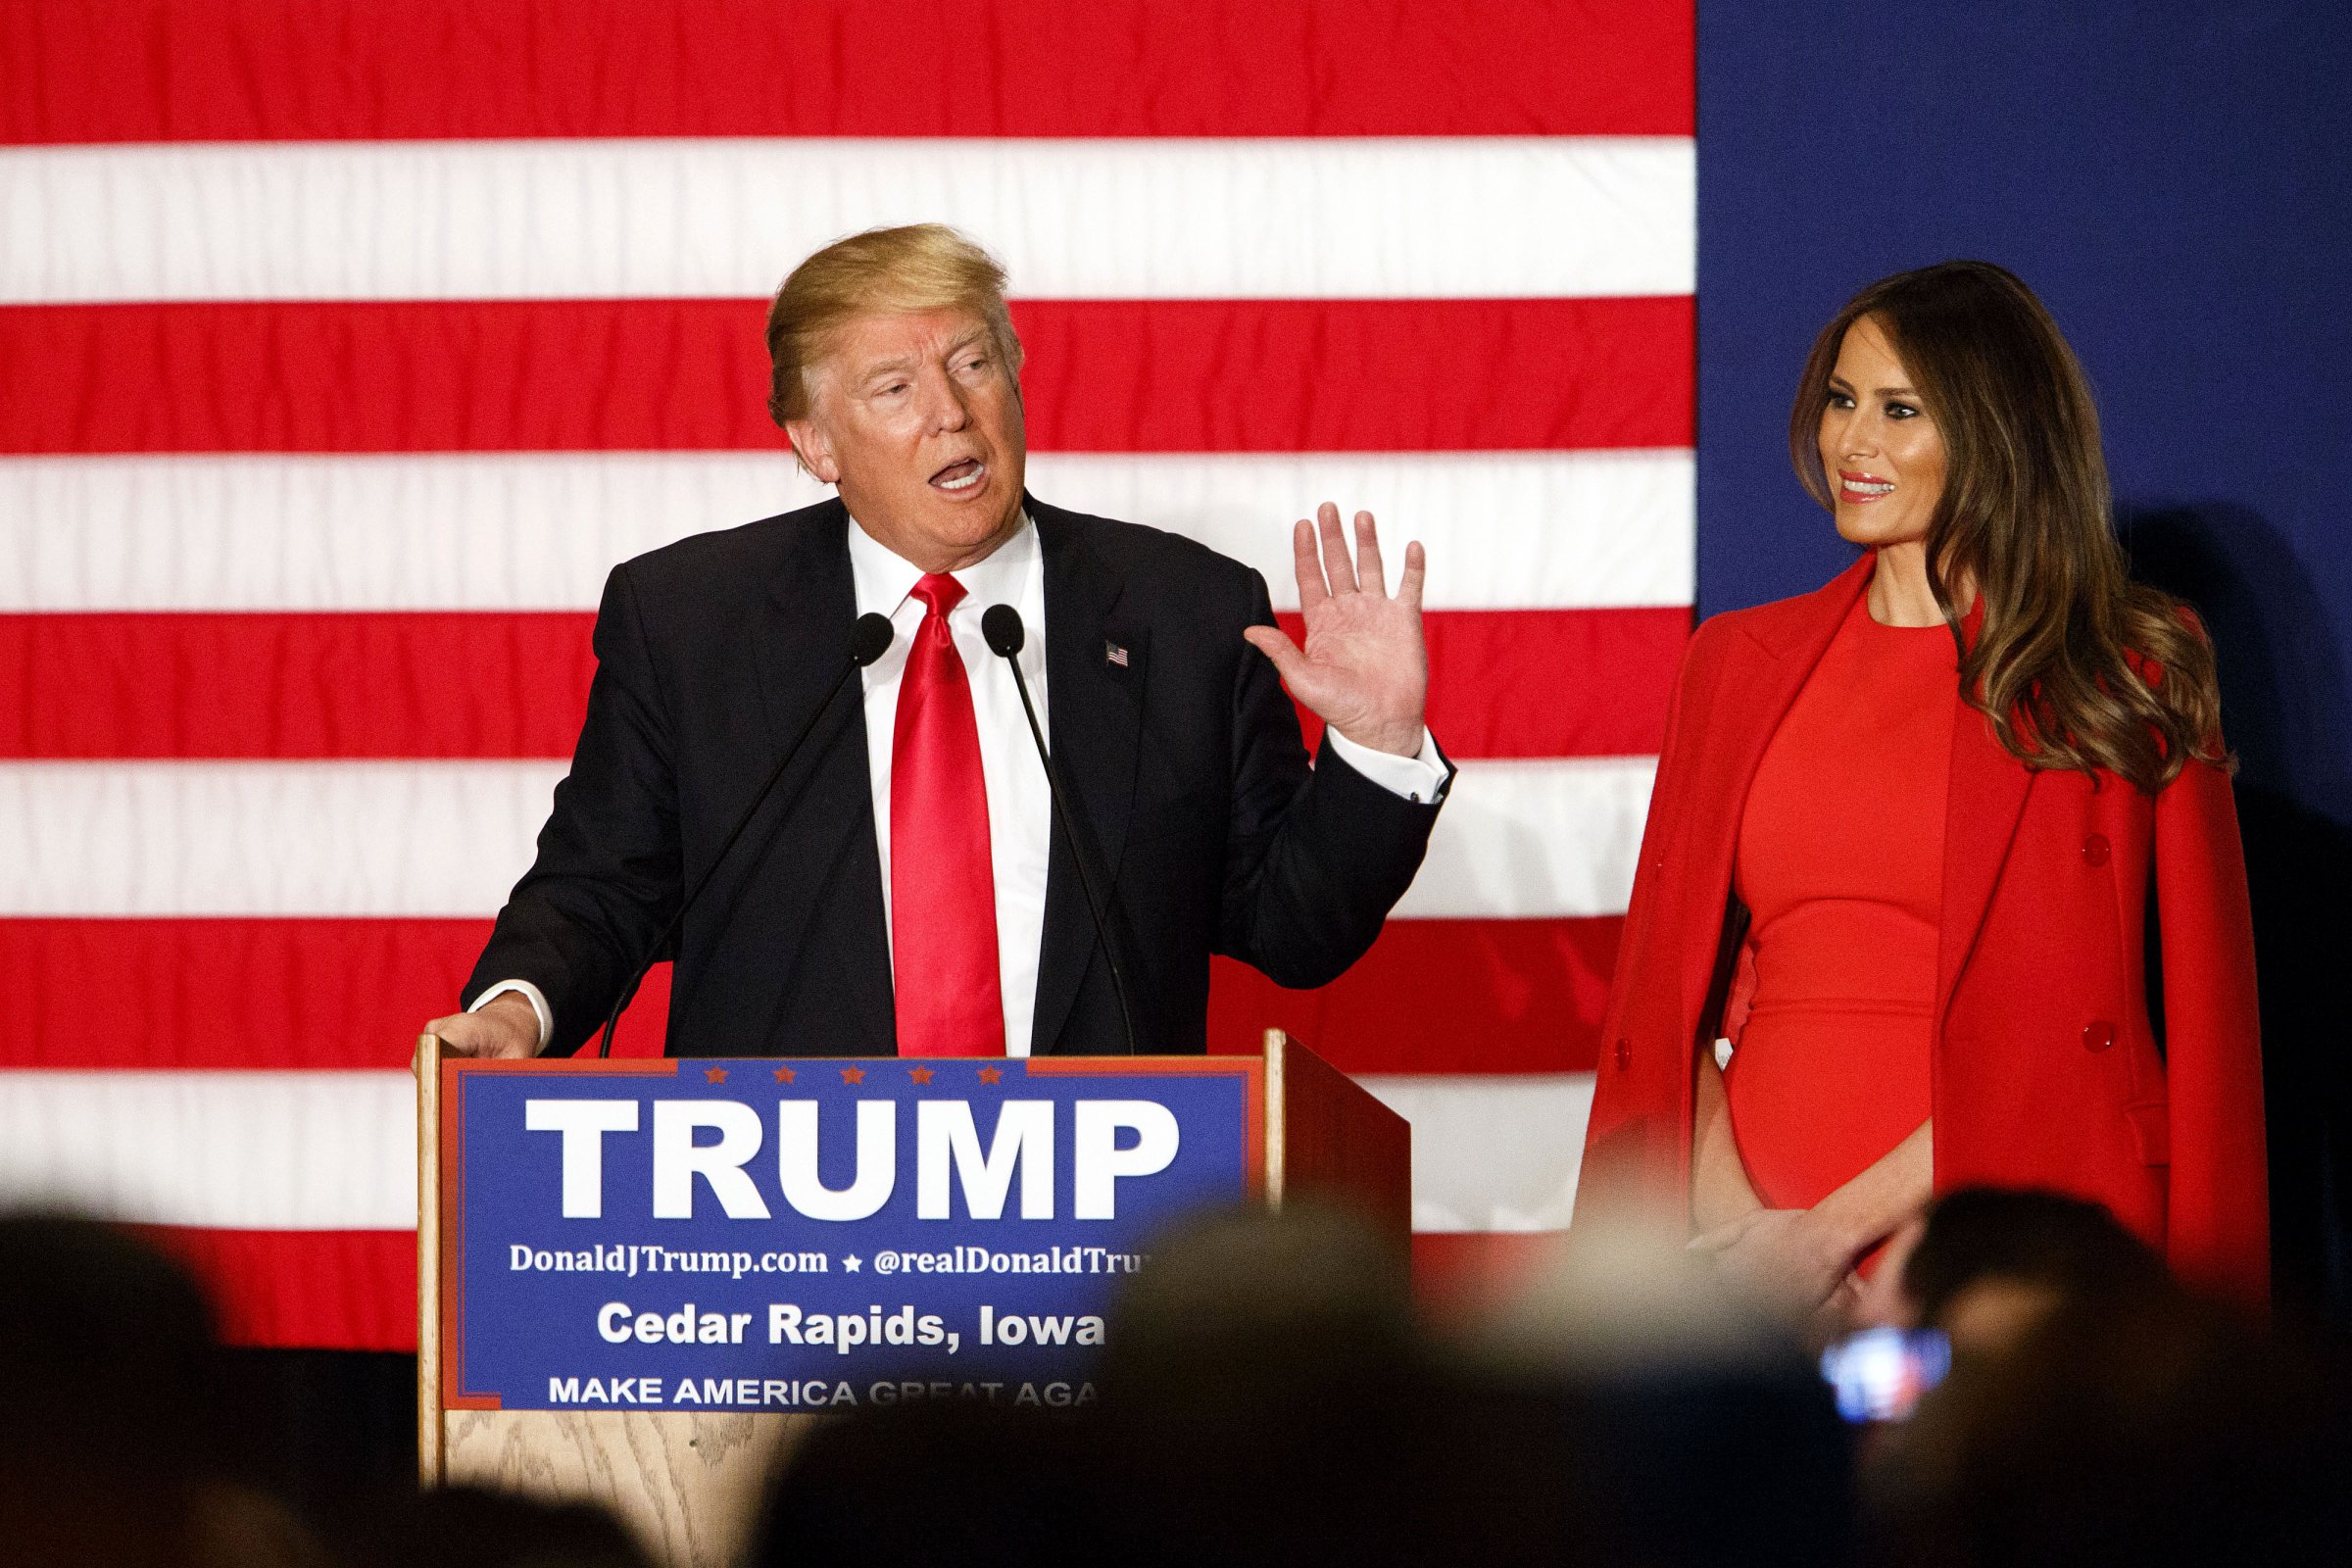 Donald Trump, president and chief executive of Trump Organization Inc. and 2016 Republican presidential candidate, left, speaks as wife Melania Trump listens during a campaign event in Cedar Rapids, Iowa, U.S., on Monday, Feb. 1, 2016.